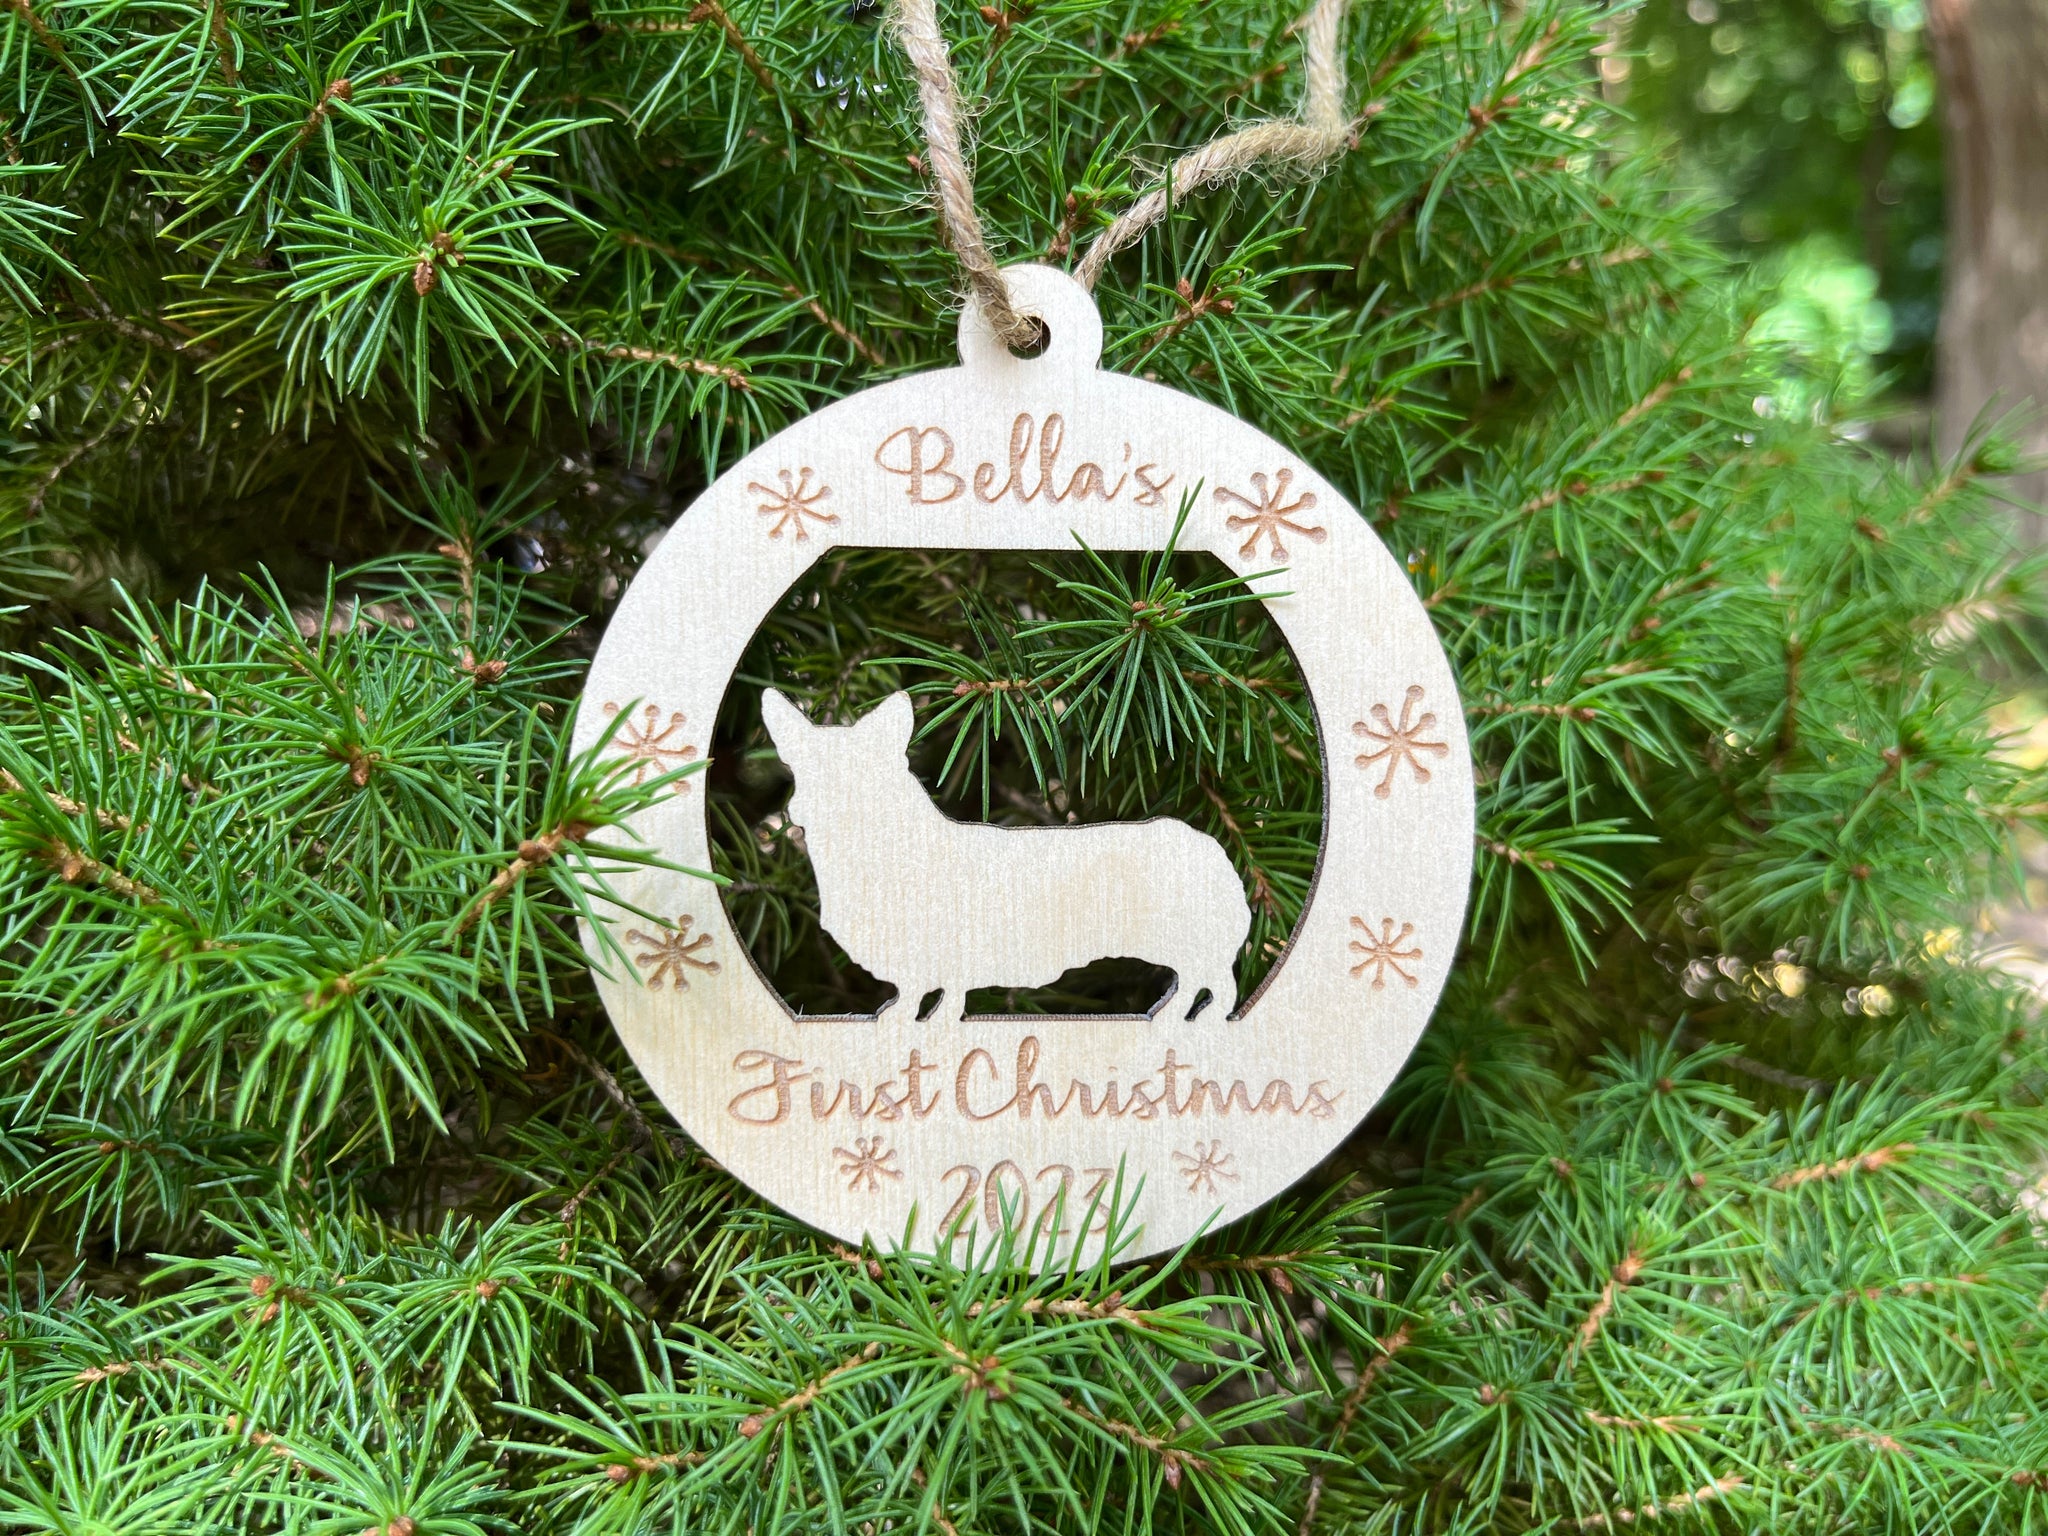 personalized puppy's first Christmas ornament round with a corgi dog silhouette